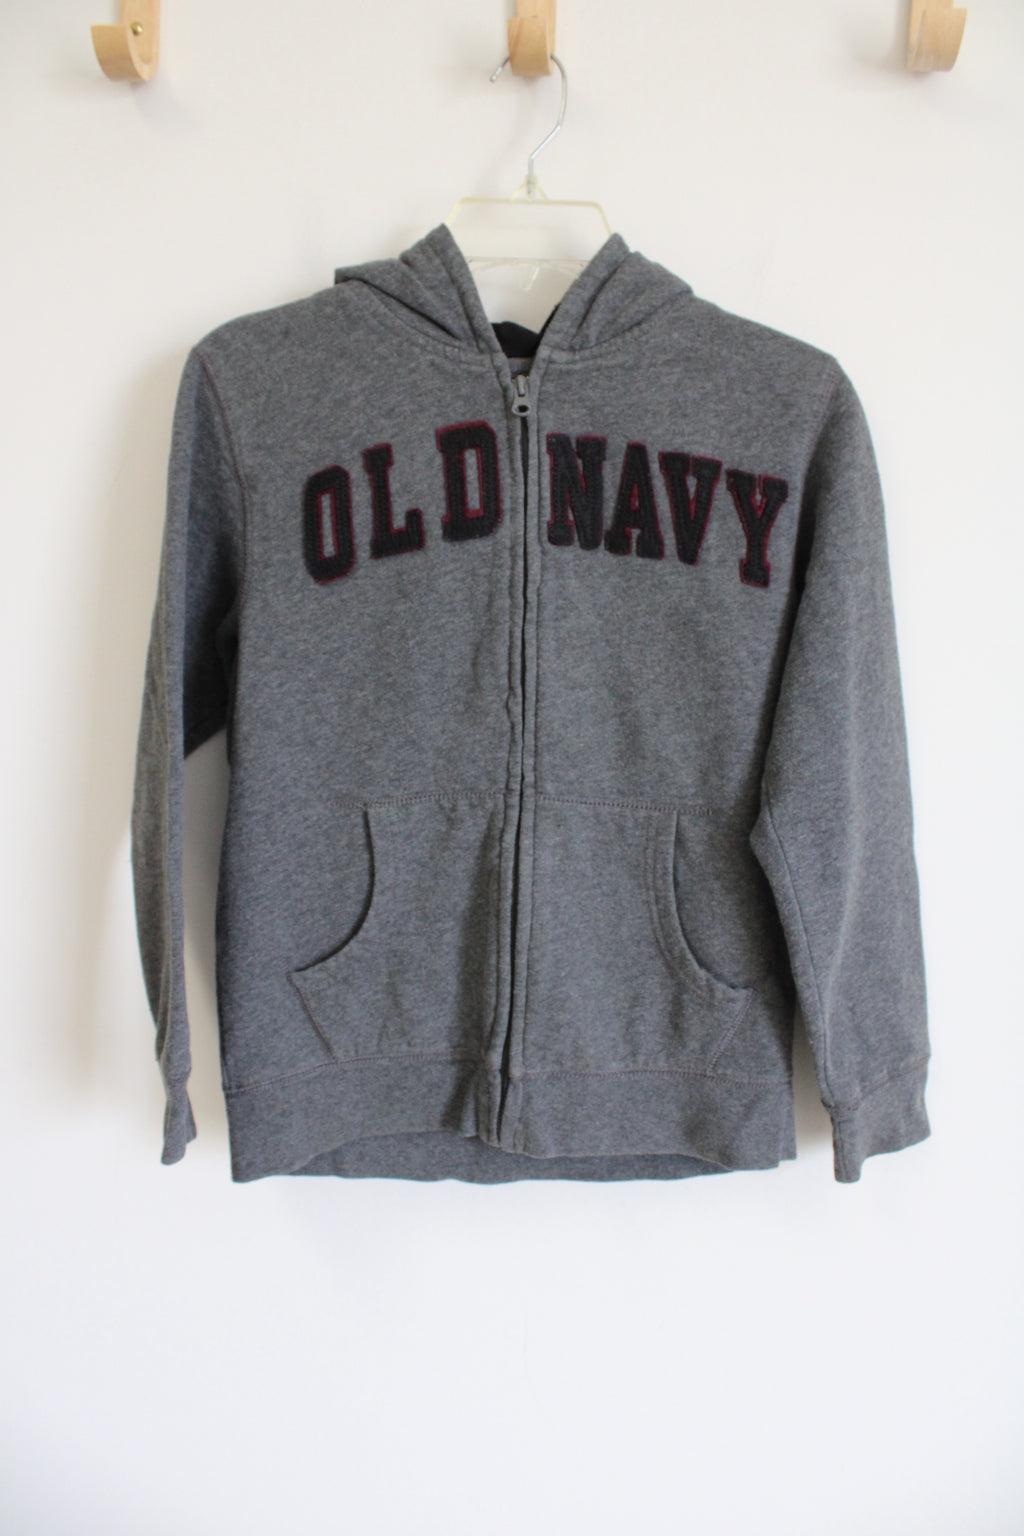 Old Navy Logo Gray Zip Up Hoodie | Youth M (8)